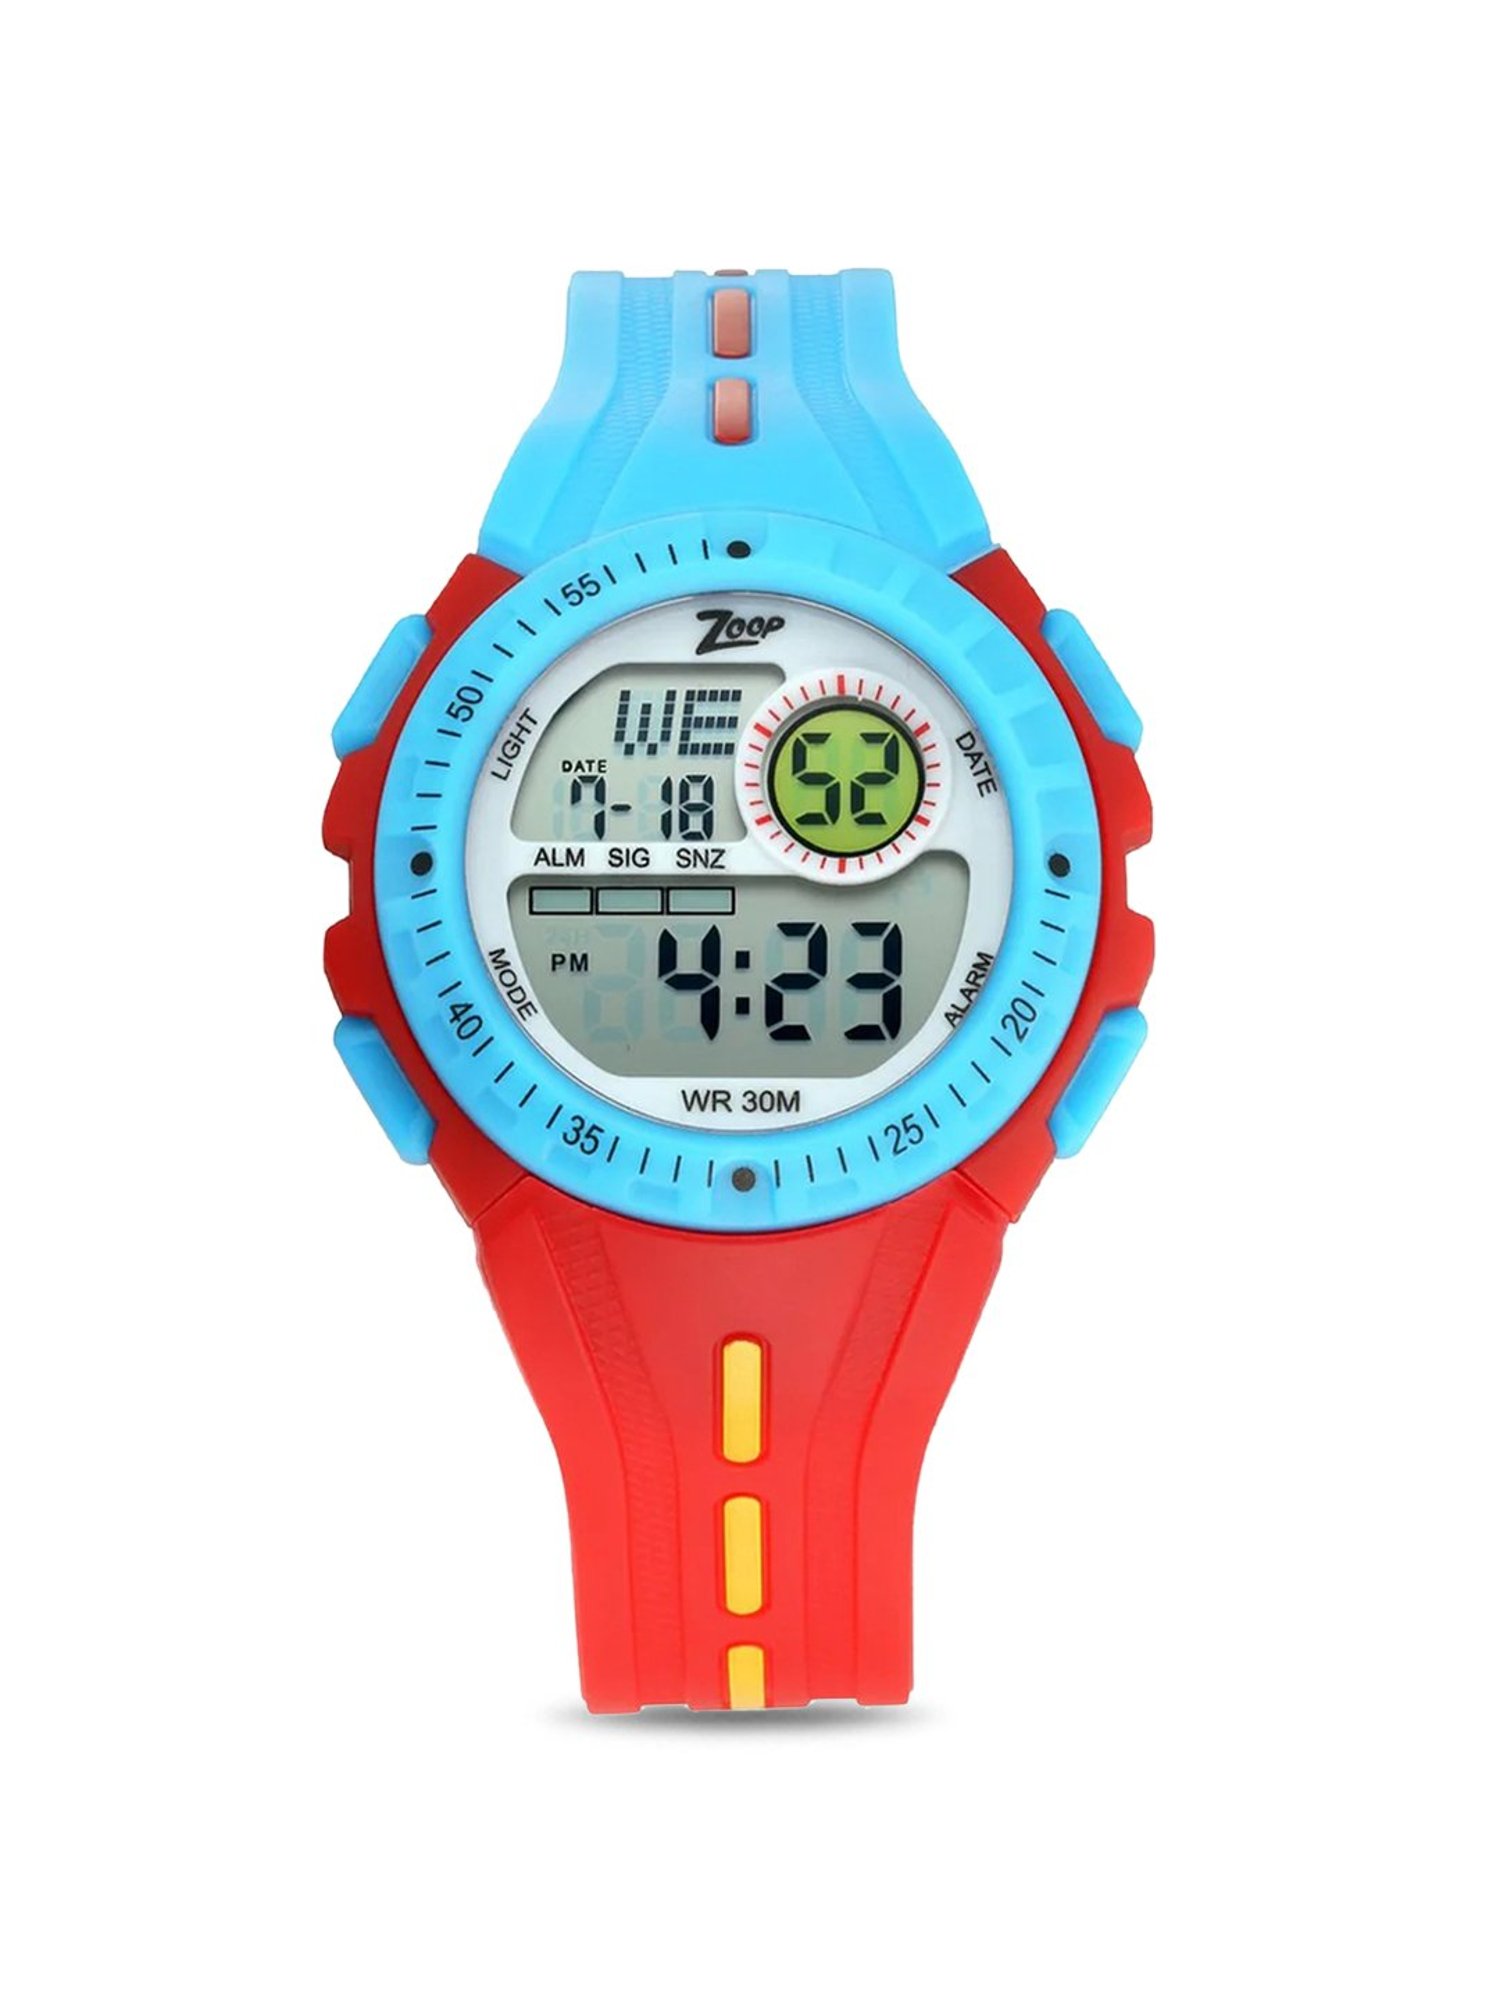 Zoop NP16016PP02 Zoop GLOW Analog Watch - For Boys & Girls - Buy Zoop  NP16016PP02 Zoop GLOW Analog Watch - For Boys & Girls NP16016PP02 Online at  Best Prices in India | Flipkart.com